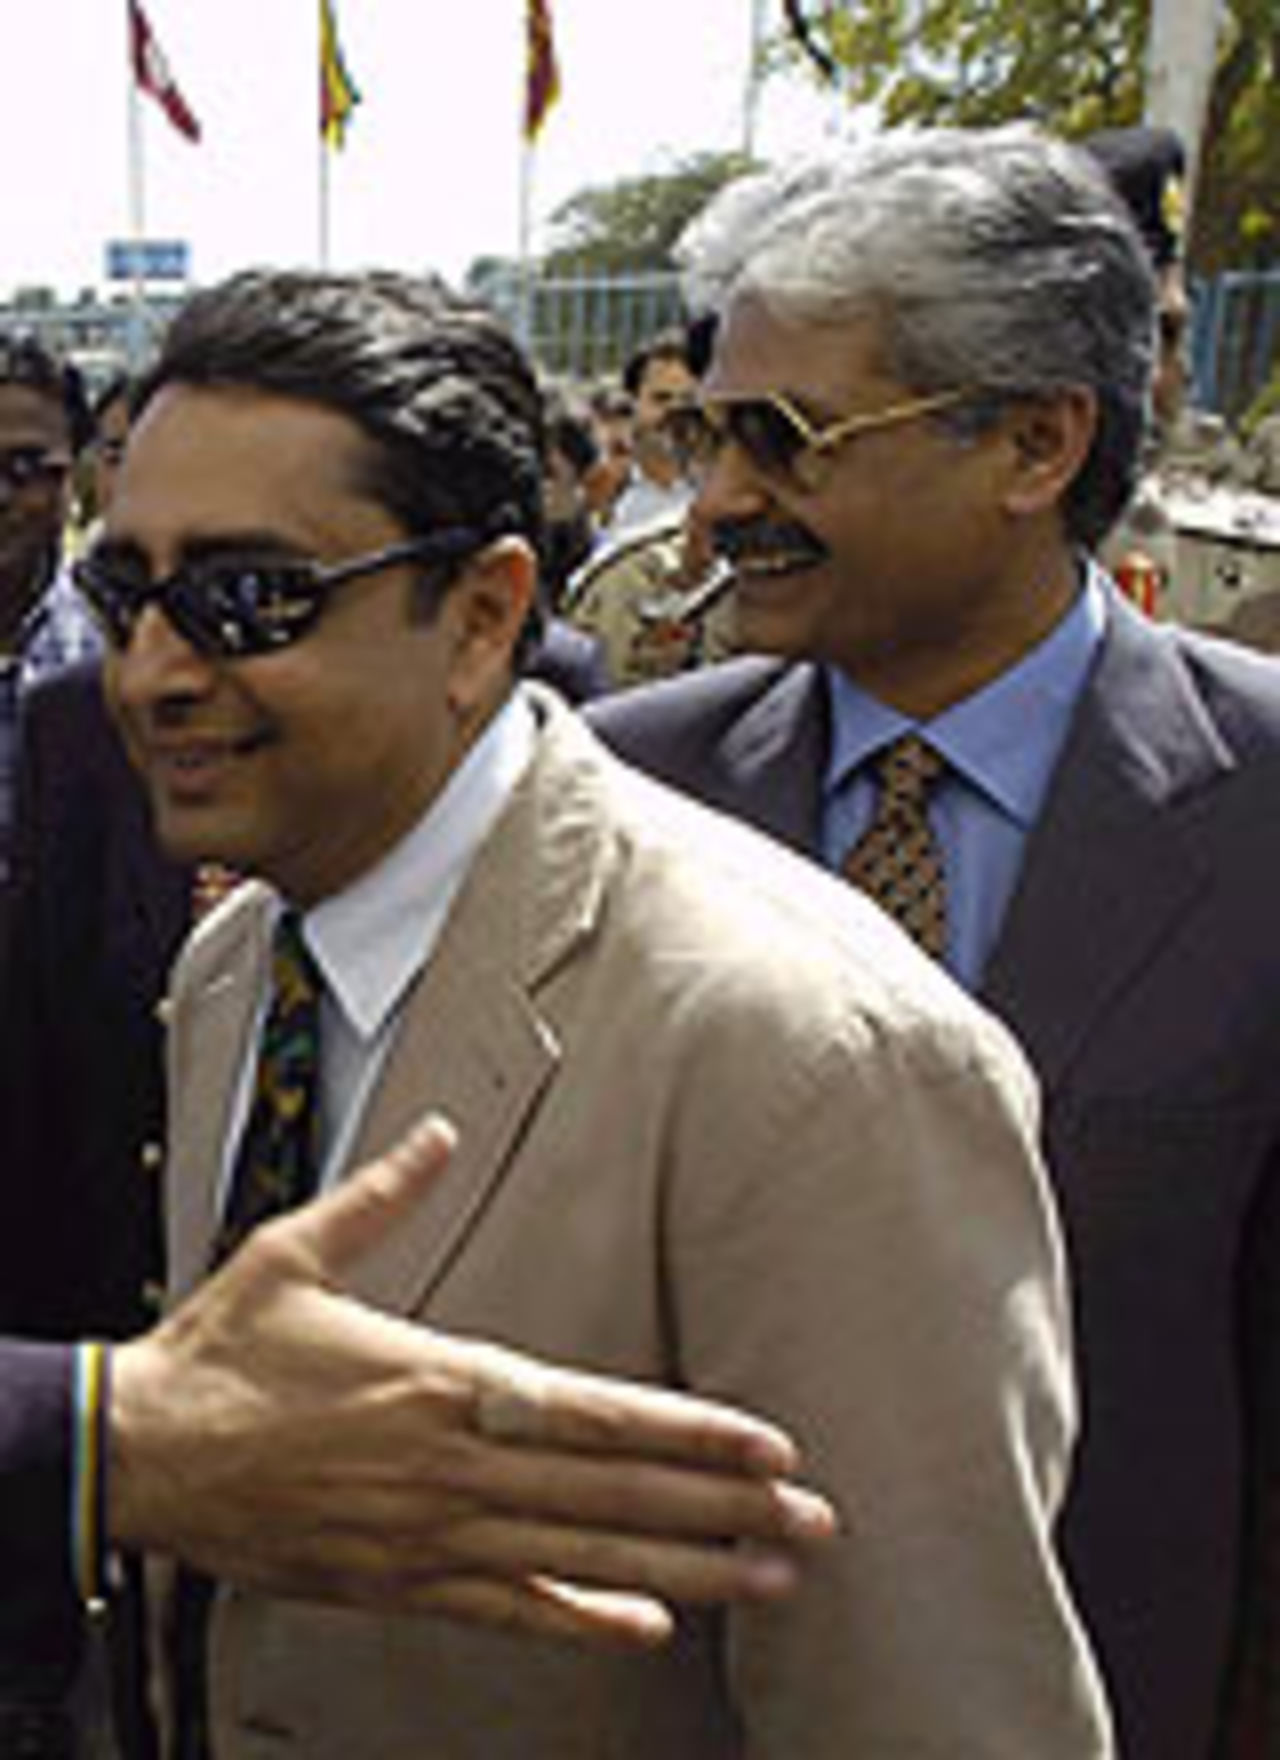 Amrit Mathur and Yashovardhan Azad, members of the BCCI's security delegation to Pakistan, checking out the facilities at Karachi's National Stadium, February 12, 2004